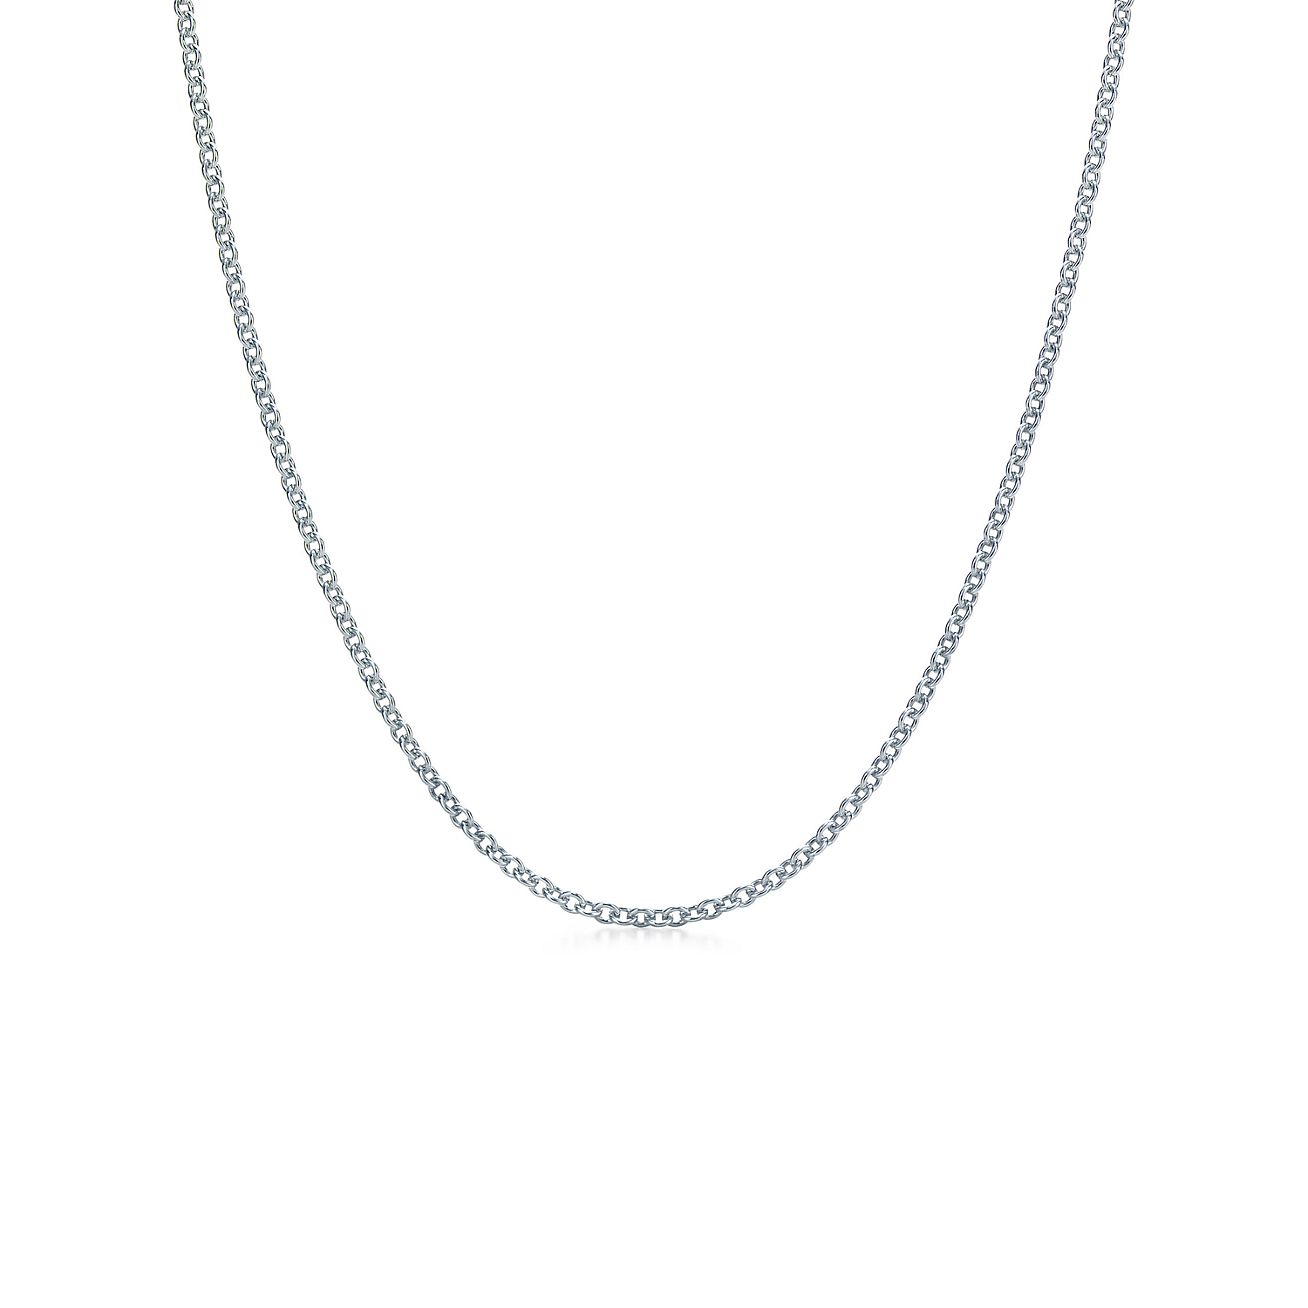 tiffany's sterling silver chain